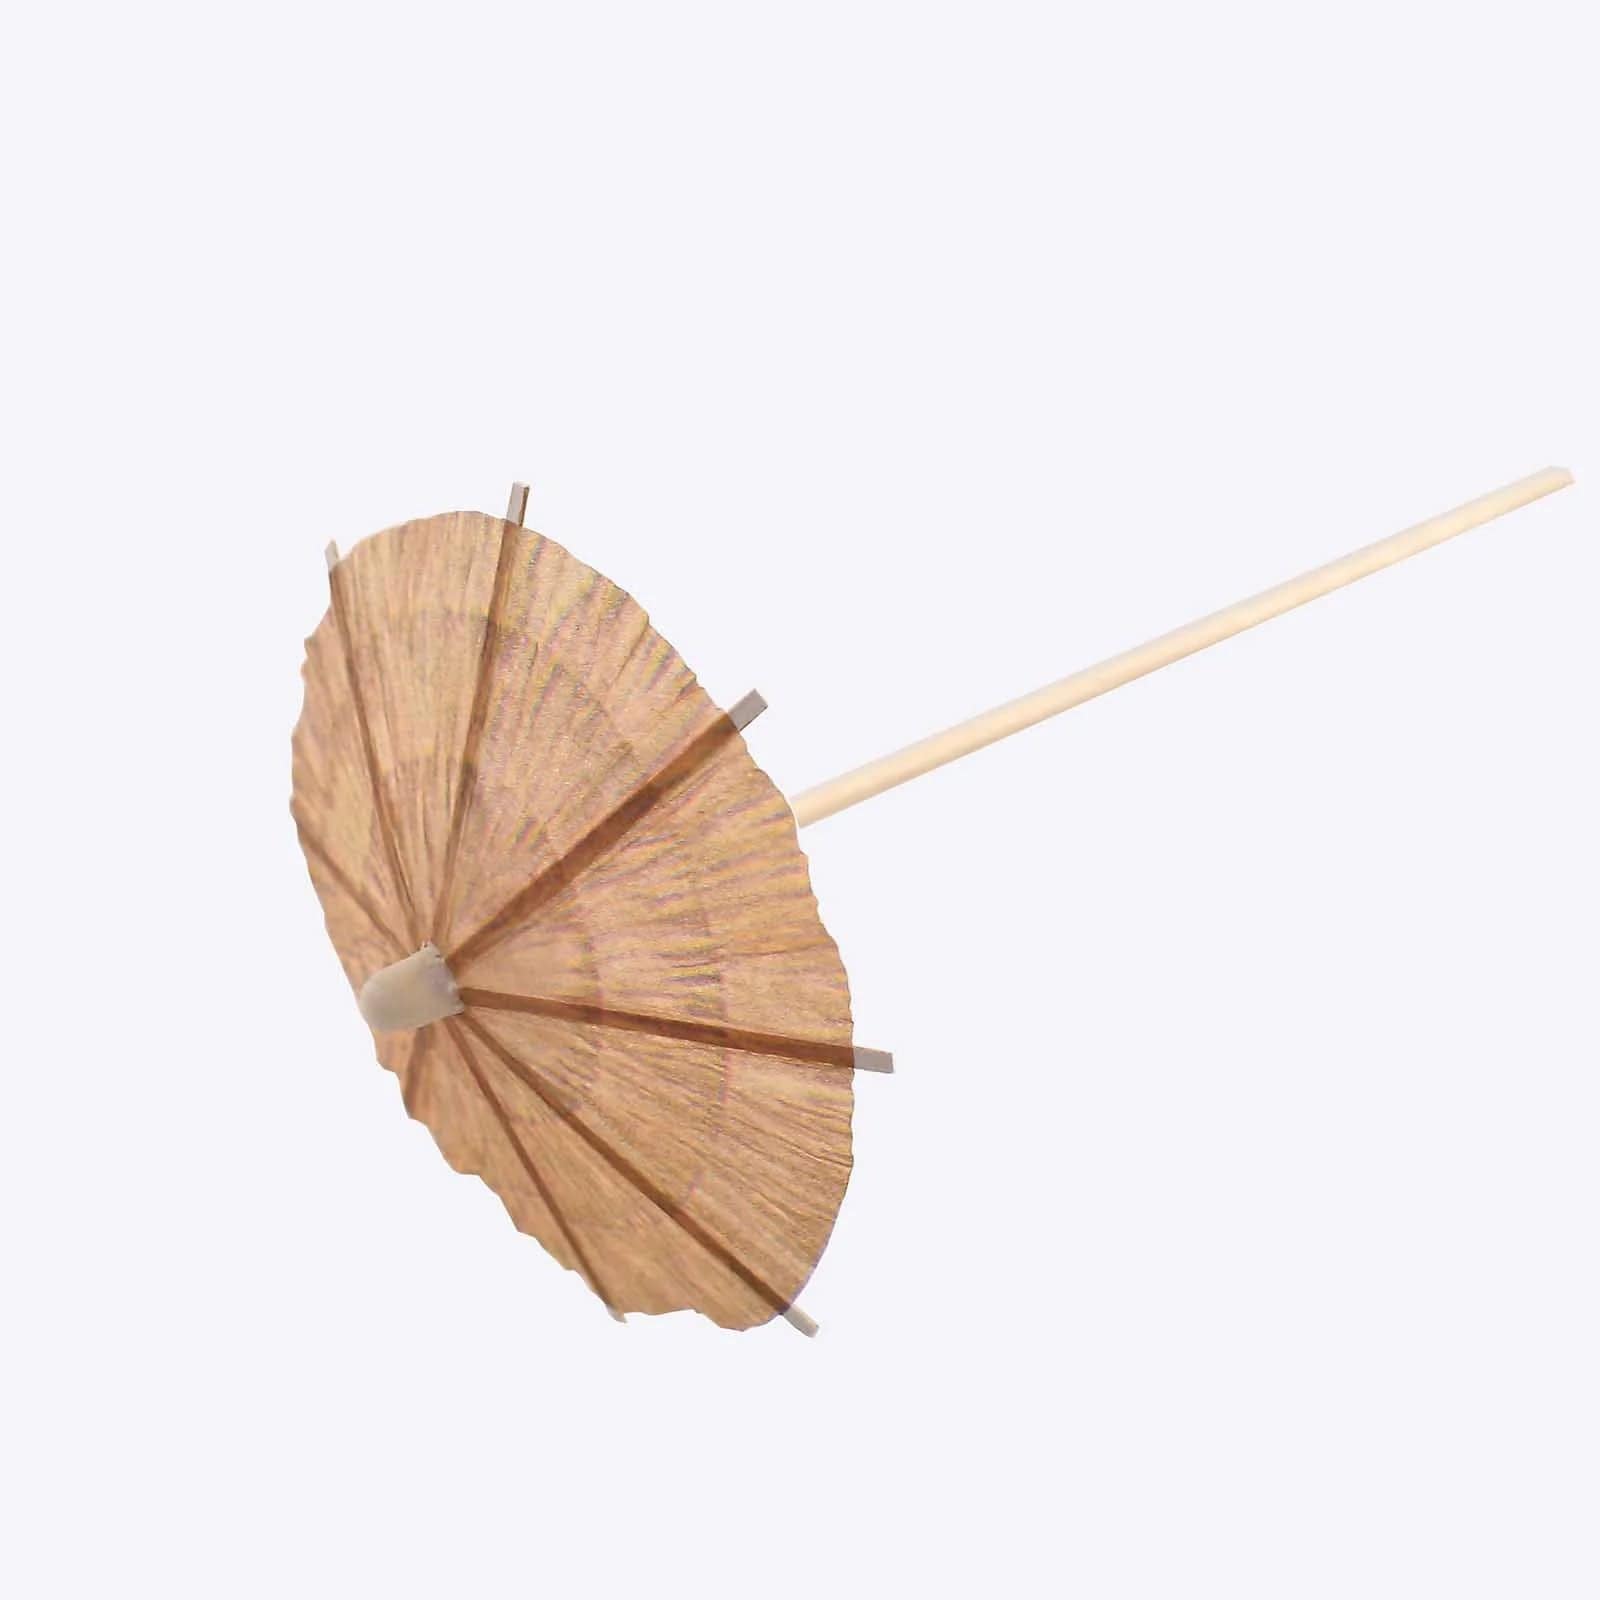 50 Natural 6 in Sustainable Bamboo Skewers Cocktail Picks with Paper Umbrella Top